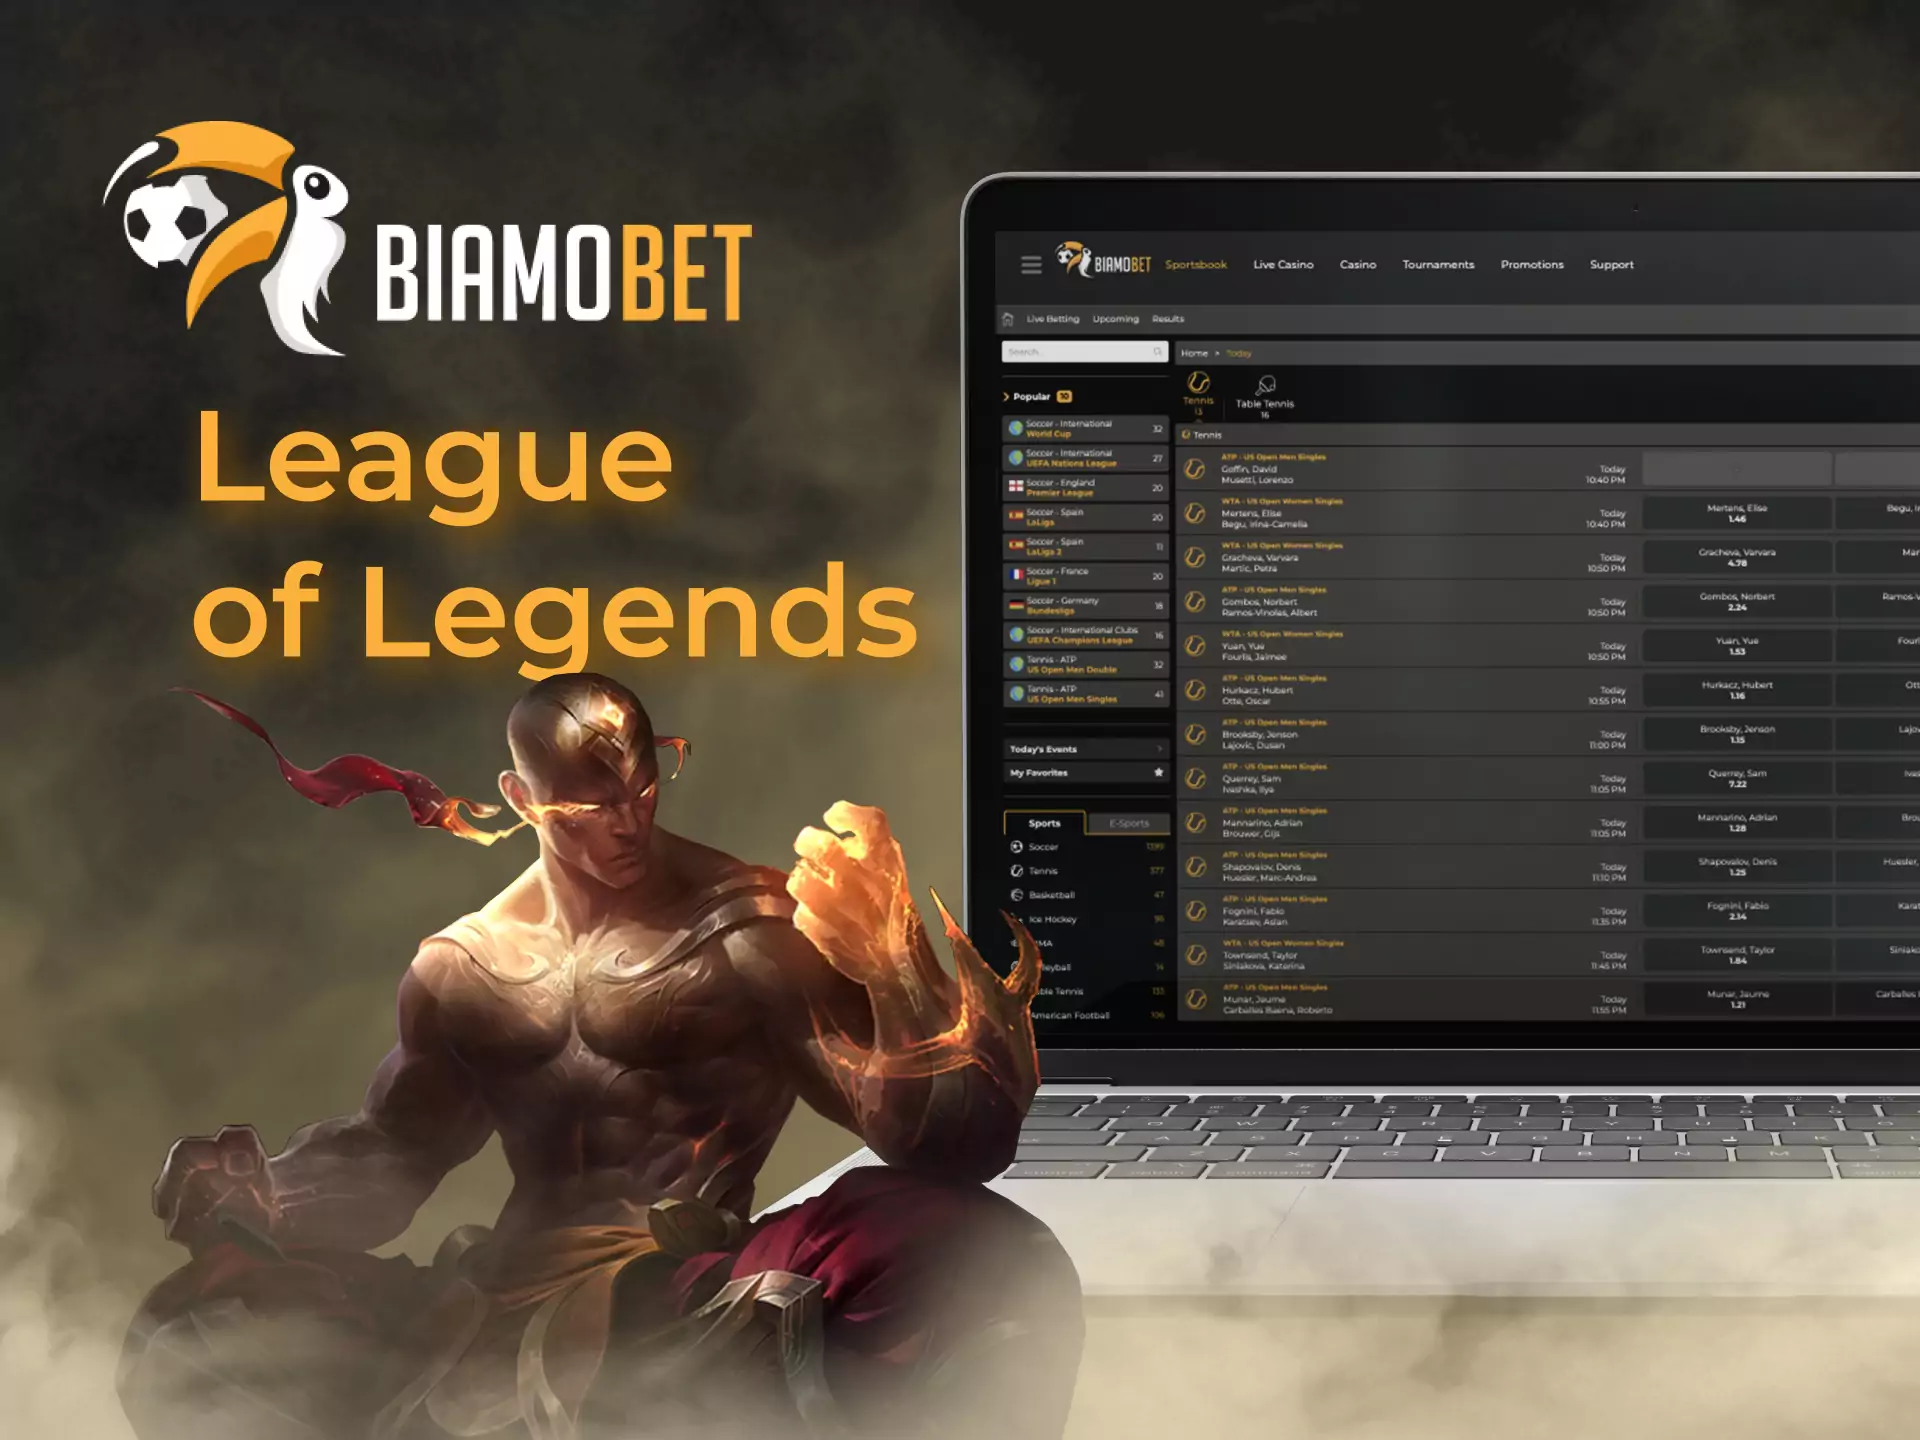 If you like the League of Legends, you can bet on a match on Biamobet.